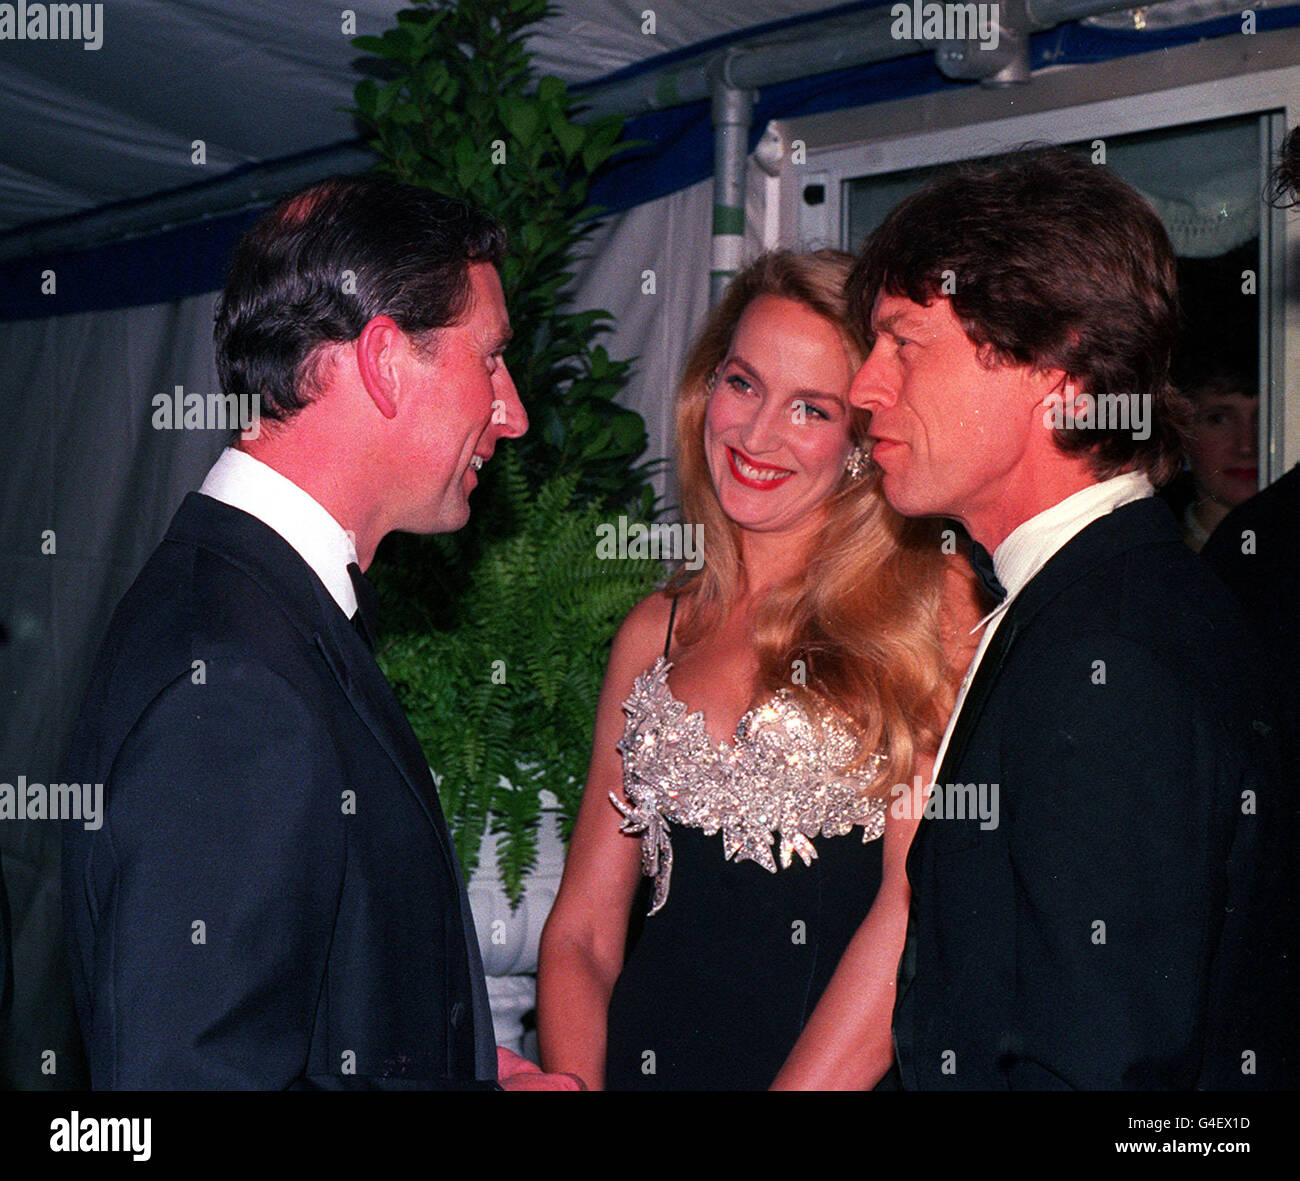 PA NEW PHOTO 6/6/91 THE PRINCE OF WALES TALKS WITH JERRY HALL AND MICK JAGGER BEFORE THE 'ROYAL ENGLISH SUMMER BANQUET' AT SMITH'S LAWN, WINDSOR, TO MARK THE 15TH ANNIVERSARY OF THE PRINCE'S TRUST. Stock Photo